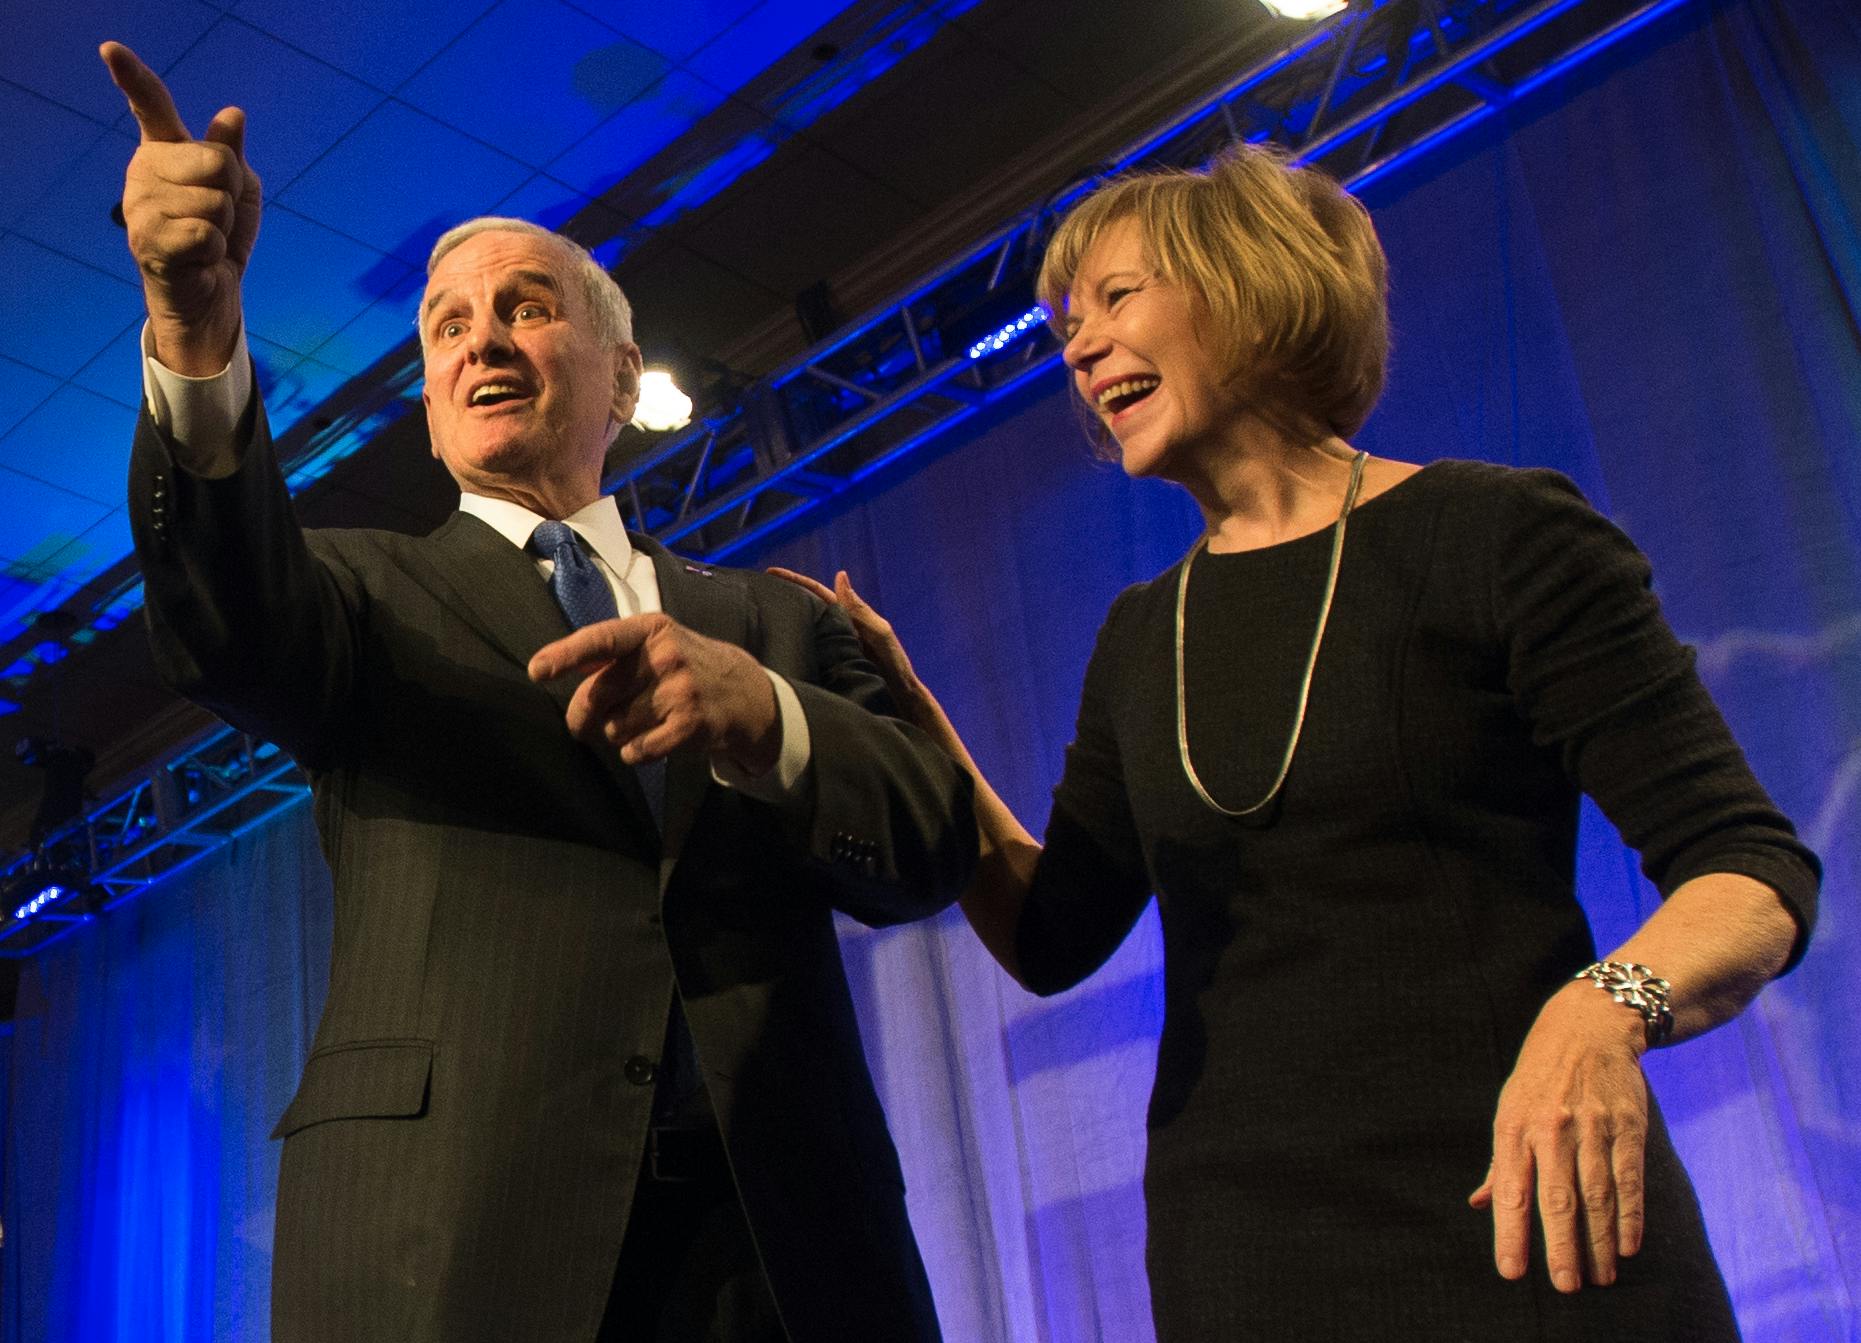 Gov. Mark Dayton secured a second term, and thanked Jeff Johnson for a gracious congratulatory phone call.